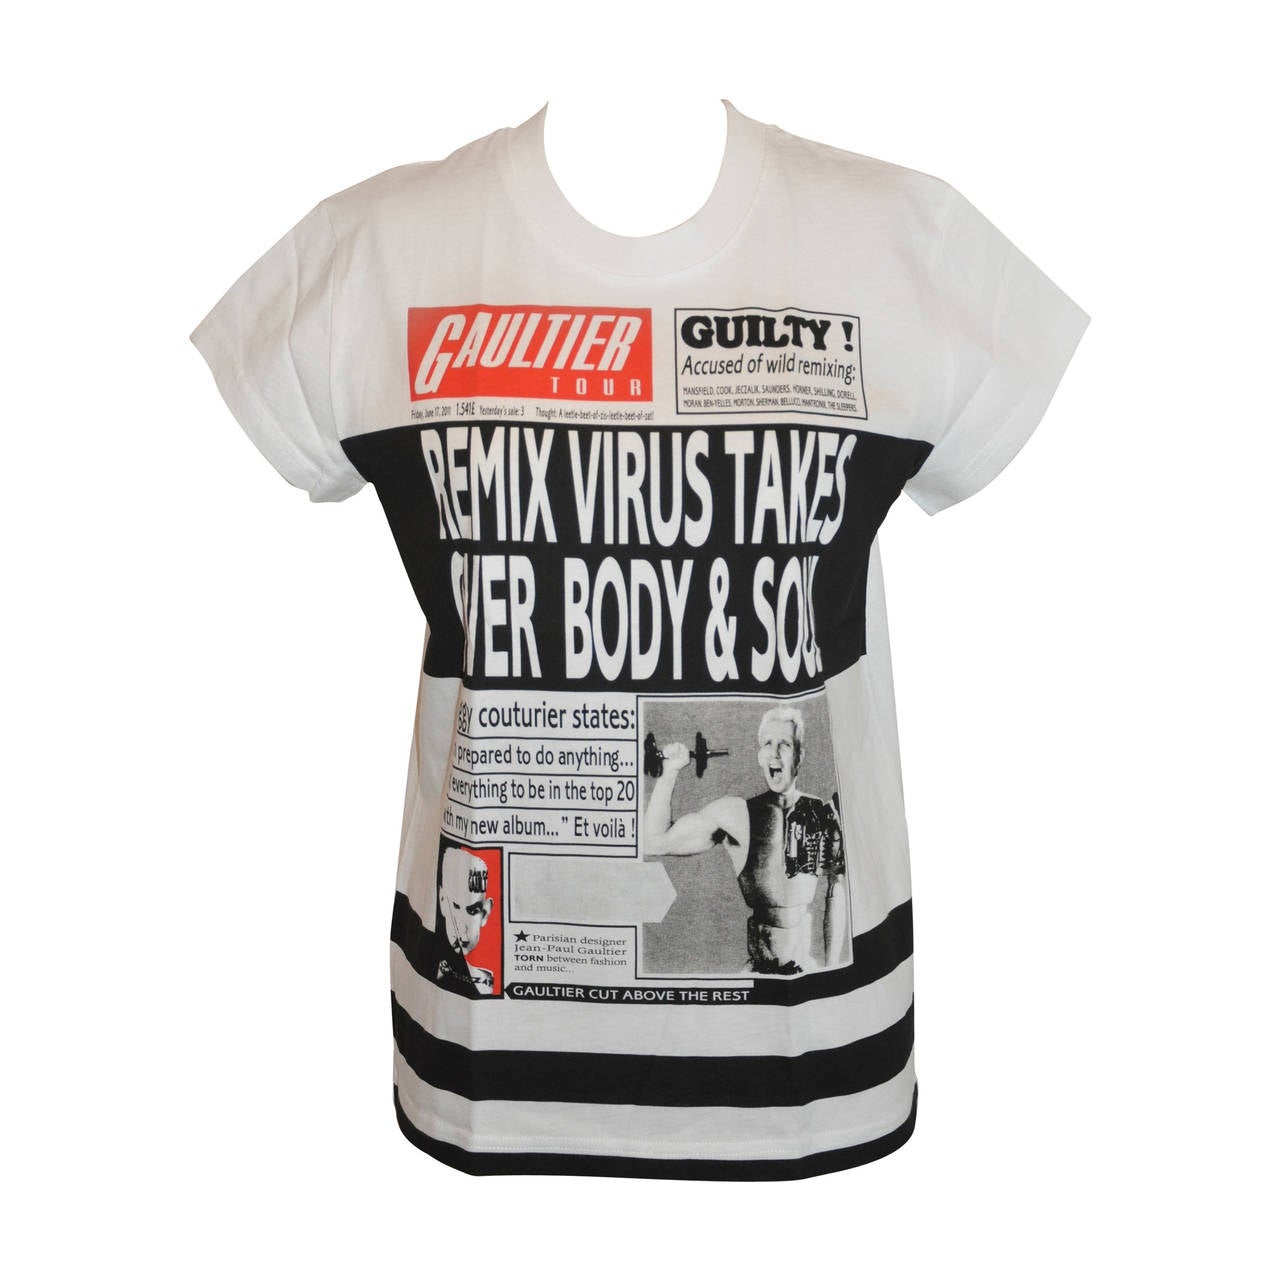 Jean Paul Gaultier "From the Sidewalk to the Catwalk" World Tour Tee-Shirt For Sale